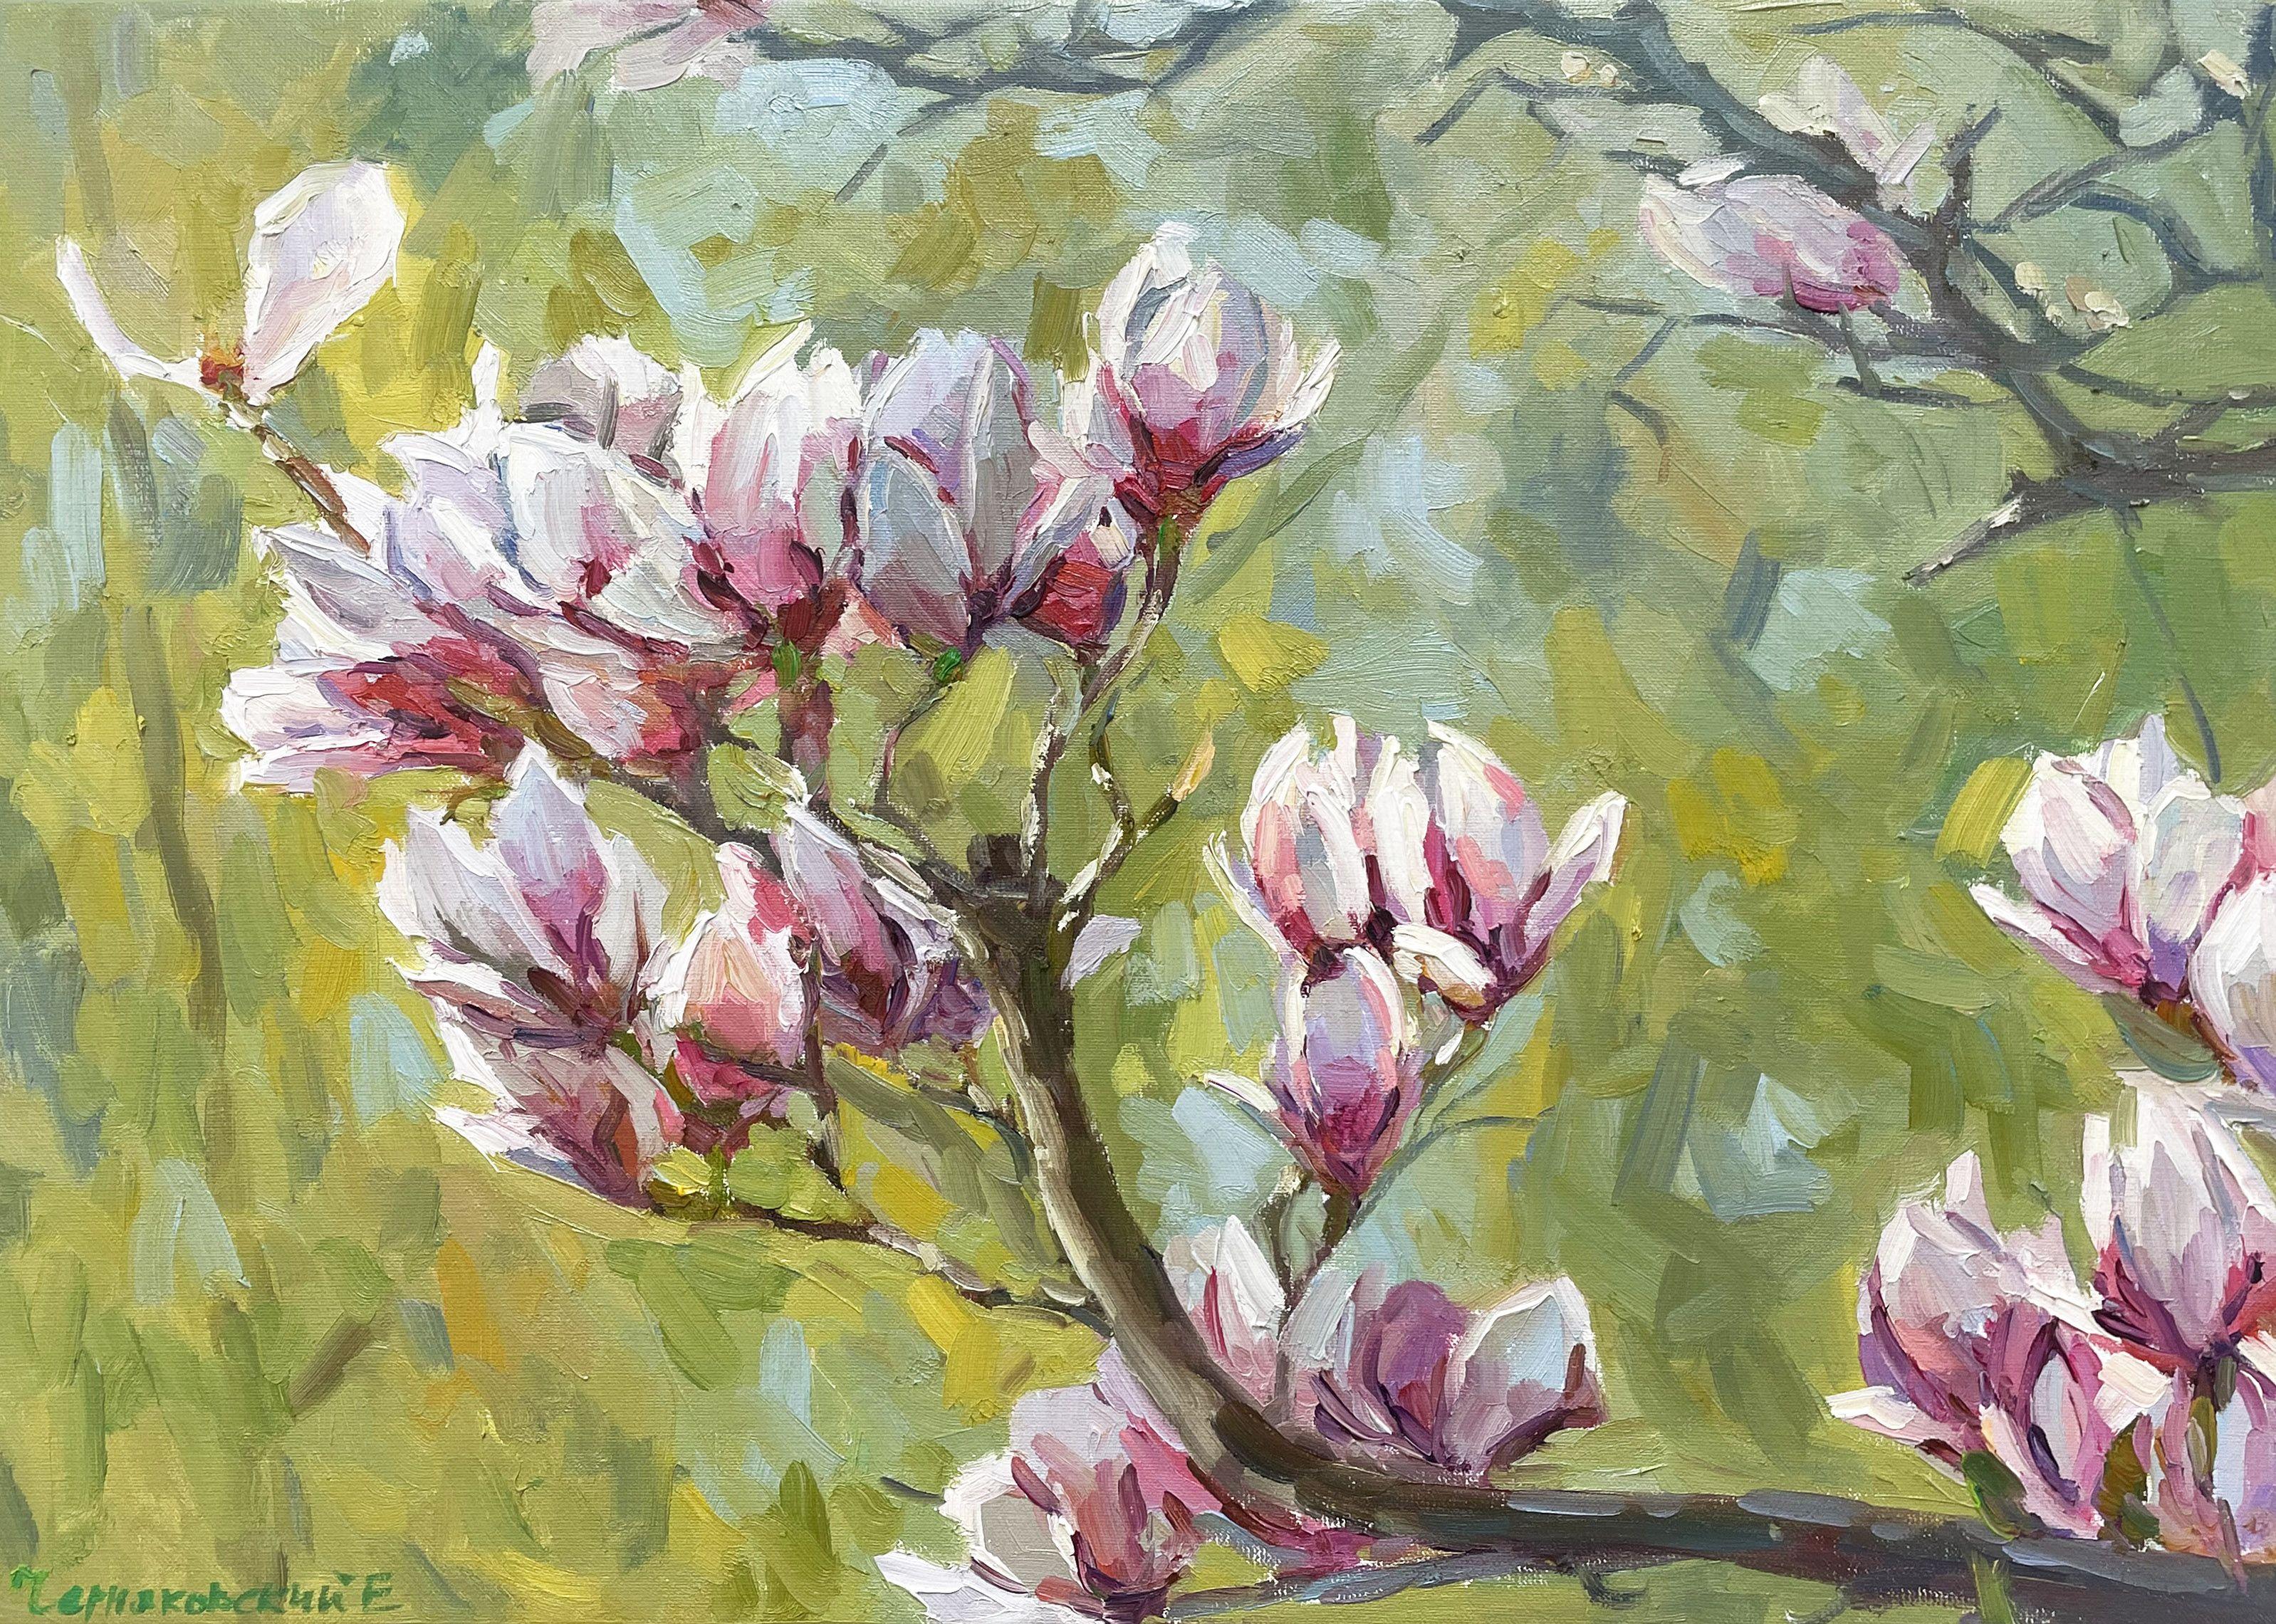 Original Oil painting by Ukrainian artist Evgeny Chernyakovsky    "magnolia branch"  50.0 X 70.0 CM / 19.6 X 27.5 IN  HIGH QUALITY oil on canvas  Signed on the front and back  Dated 2023  Good condition  GUARANTEE OF AUTHENTICITY   :: Painting ::